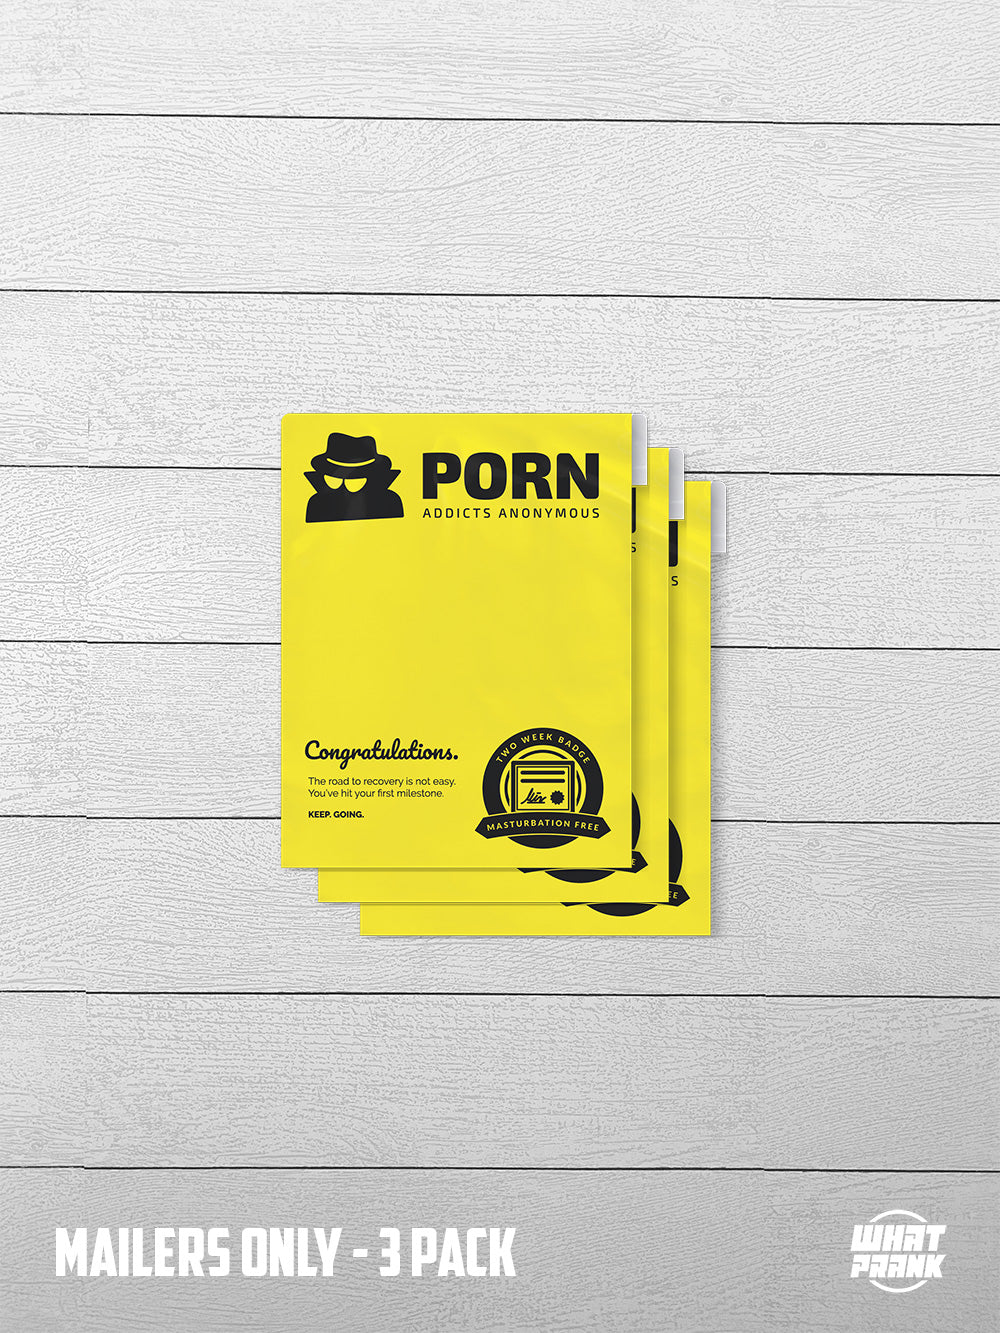 Porn Addicts Anonymous - Individual Mailers